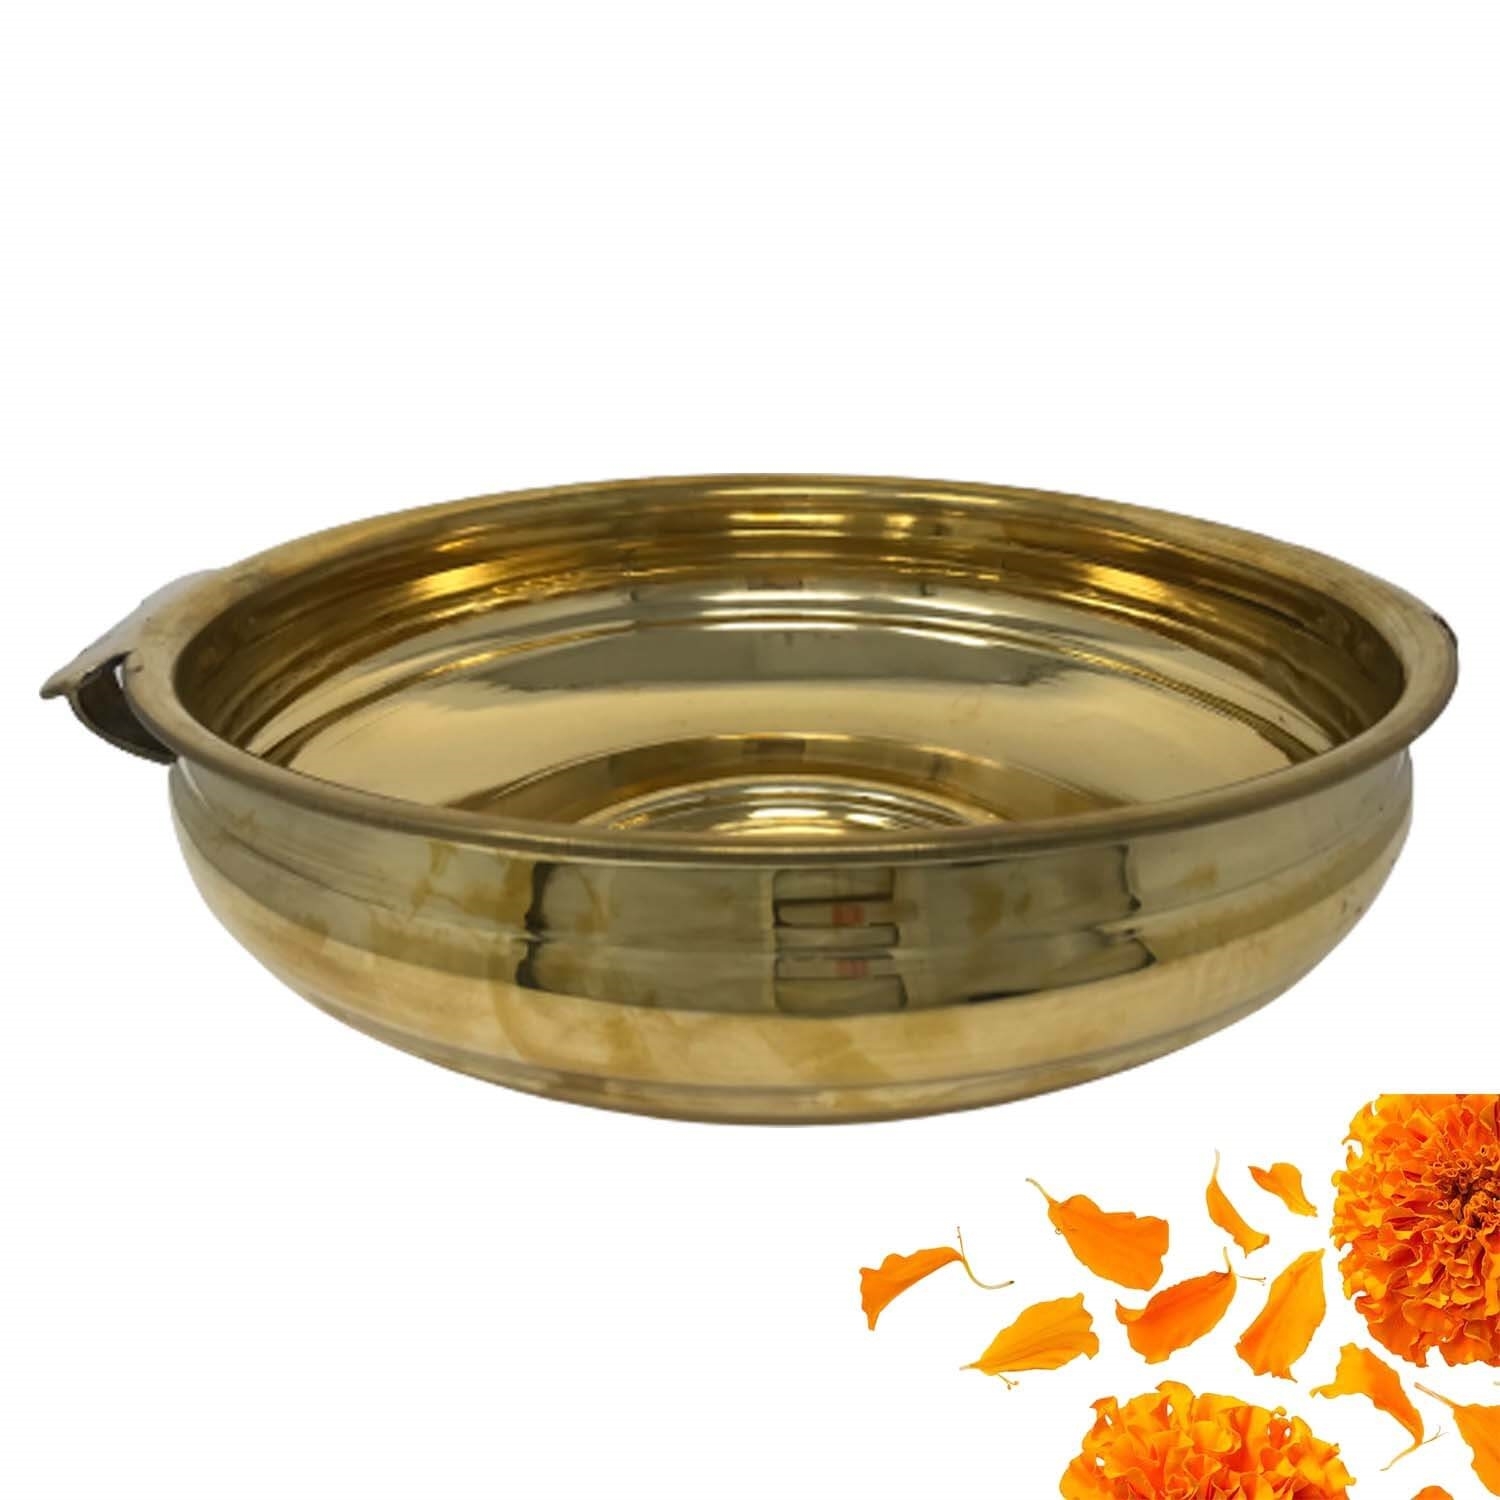 Handcrafted Traditional Pure Brass (Shiney Finish) Urli Bowl/Pot 16 Inches Dia -made available by Celebrate Festival Inc